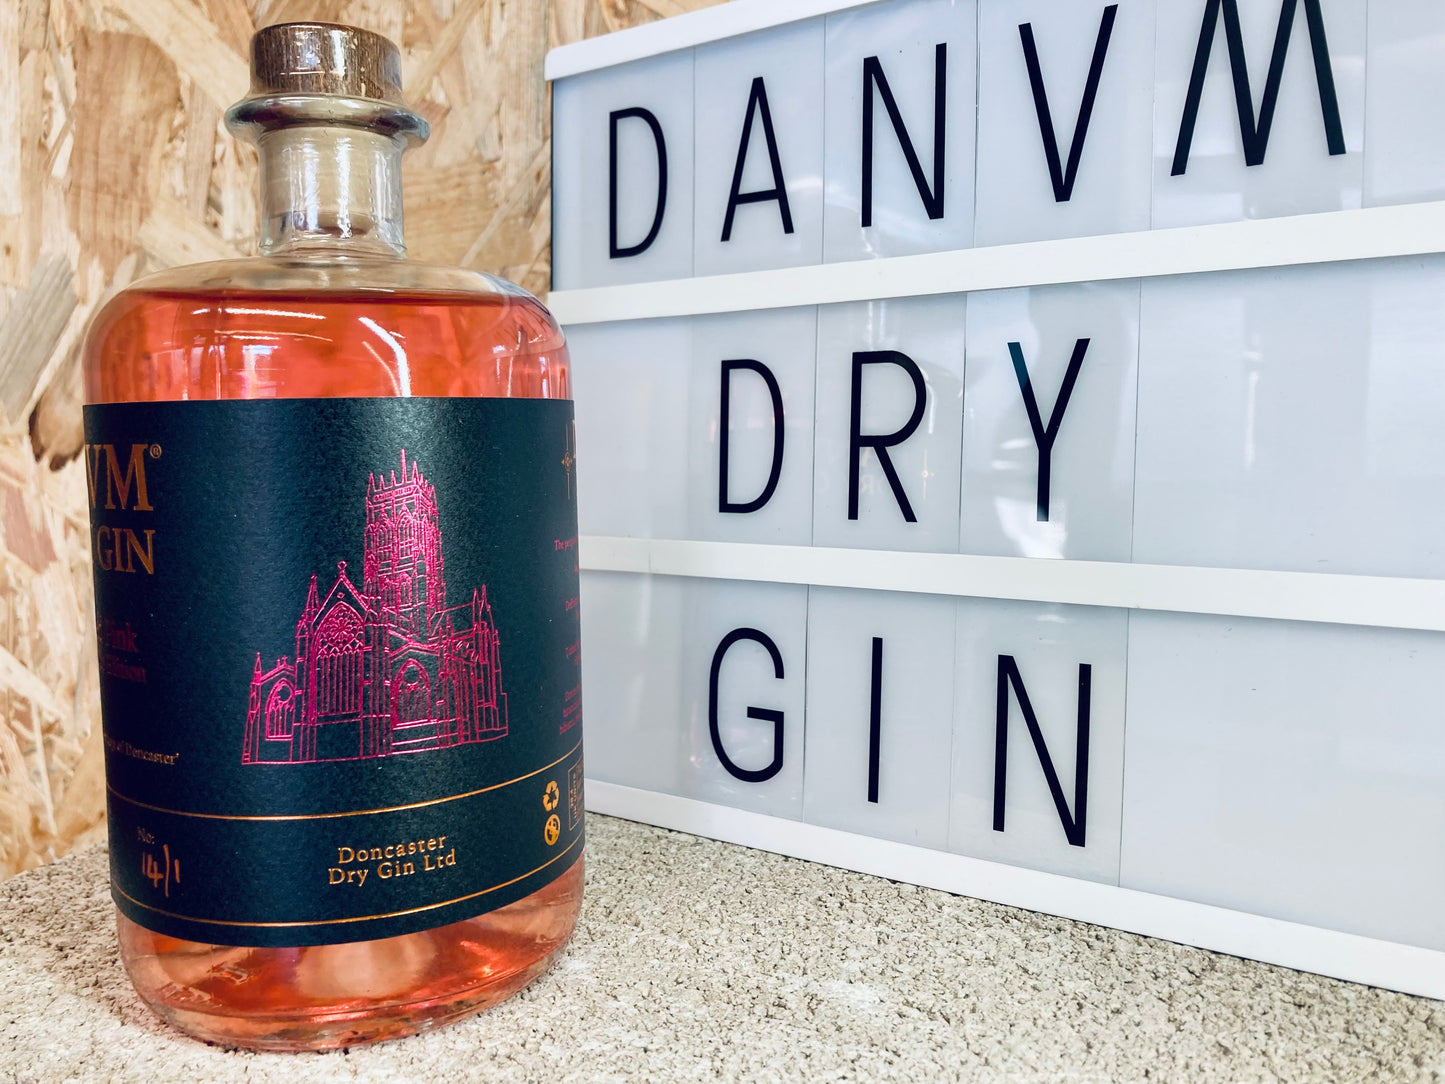 Danvm Dry Gin - Tickled Pink City Status Edition 70cl